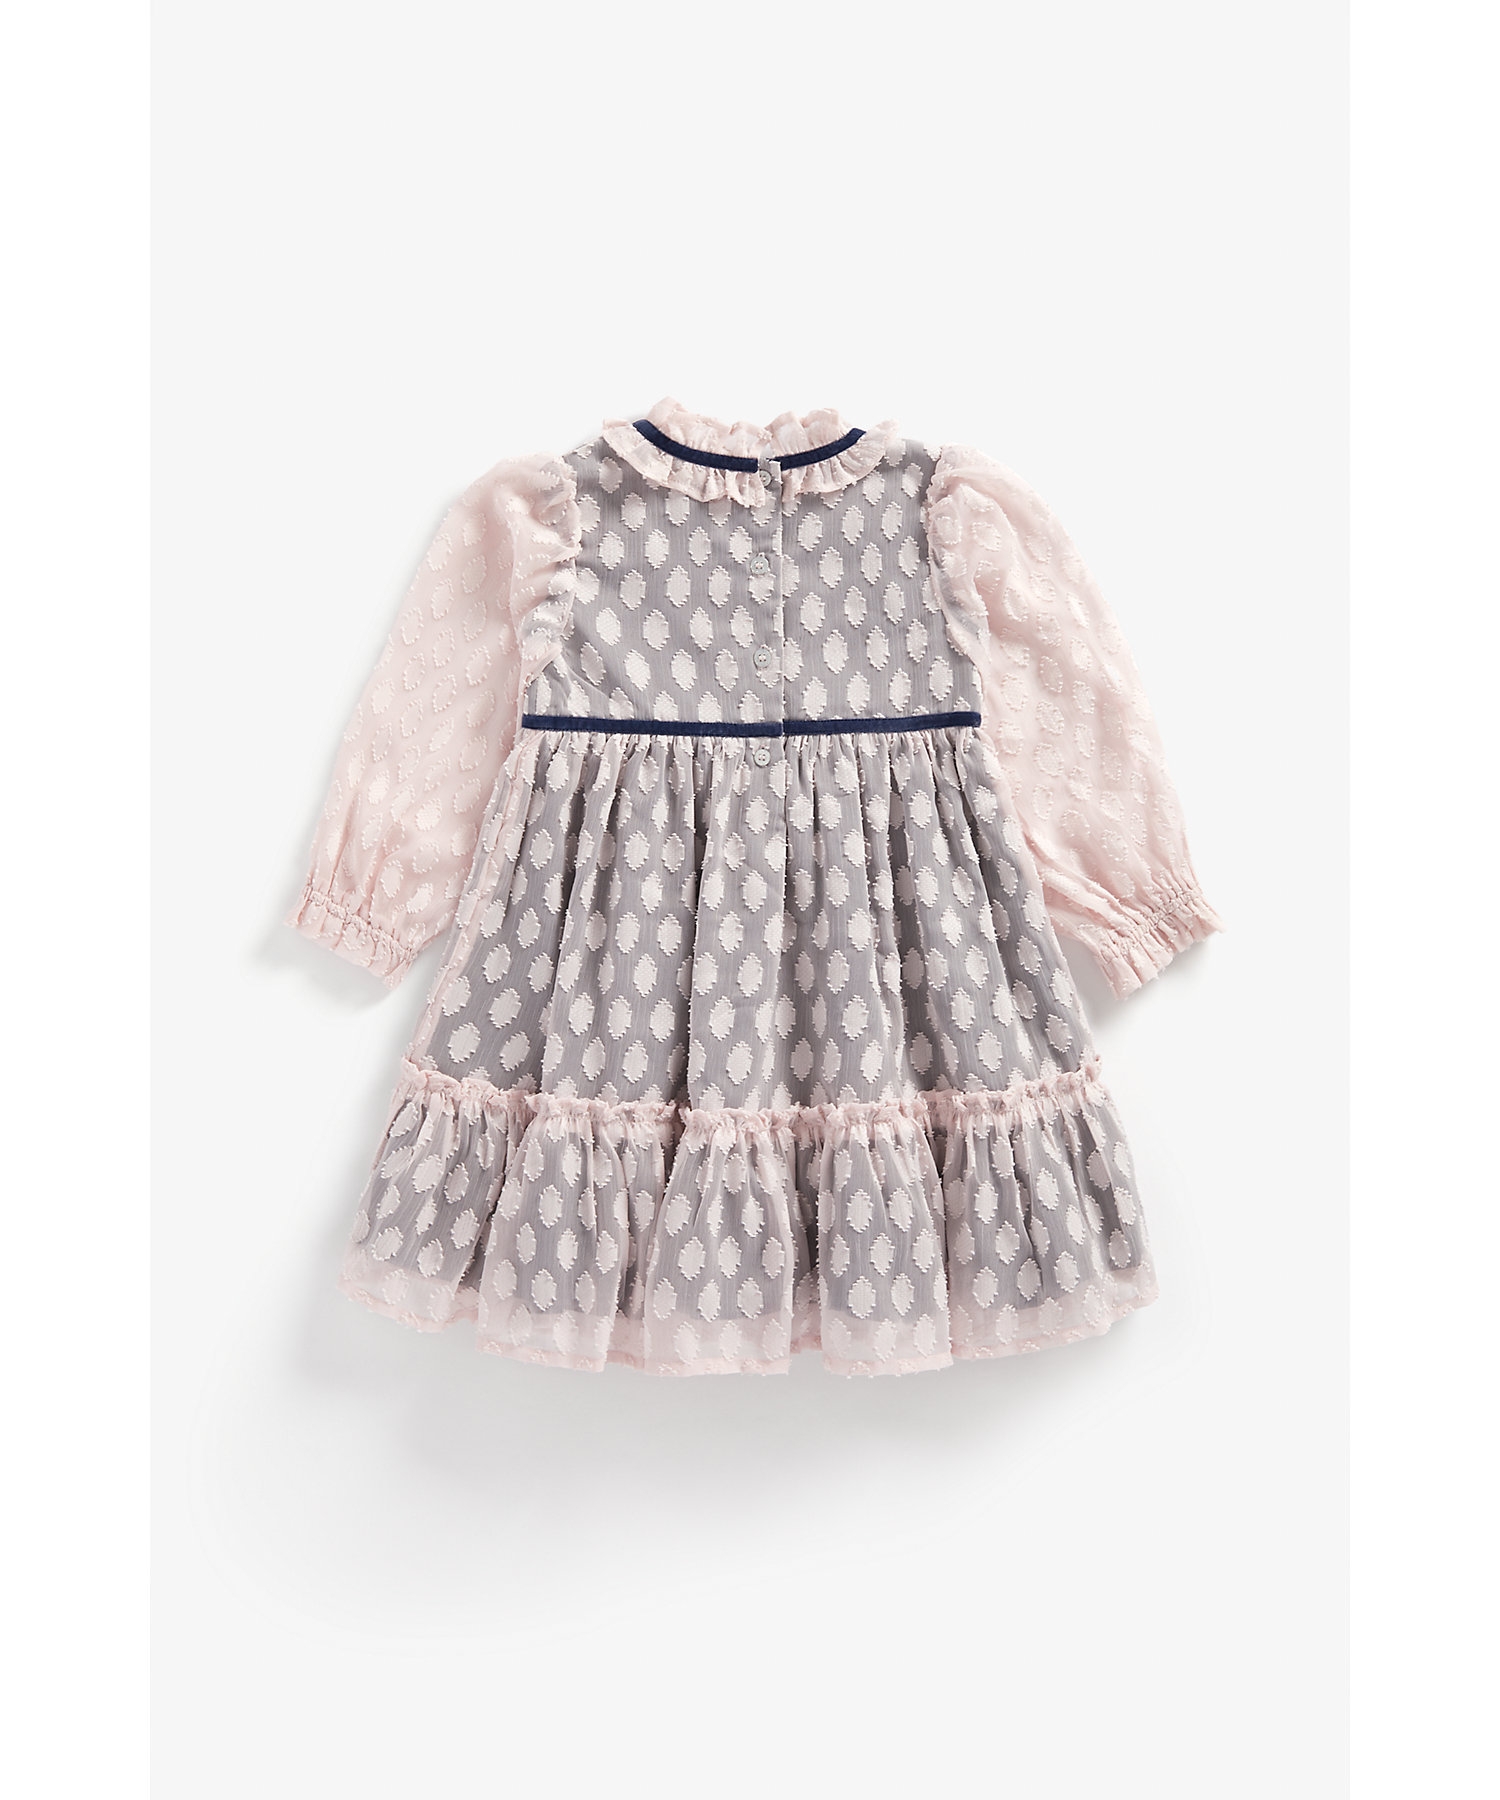 Girls Full Sleeves Party Dress With Frilled Neckline - Pink